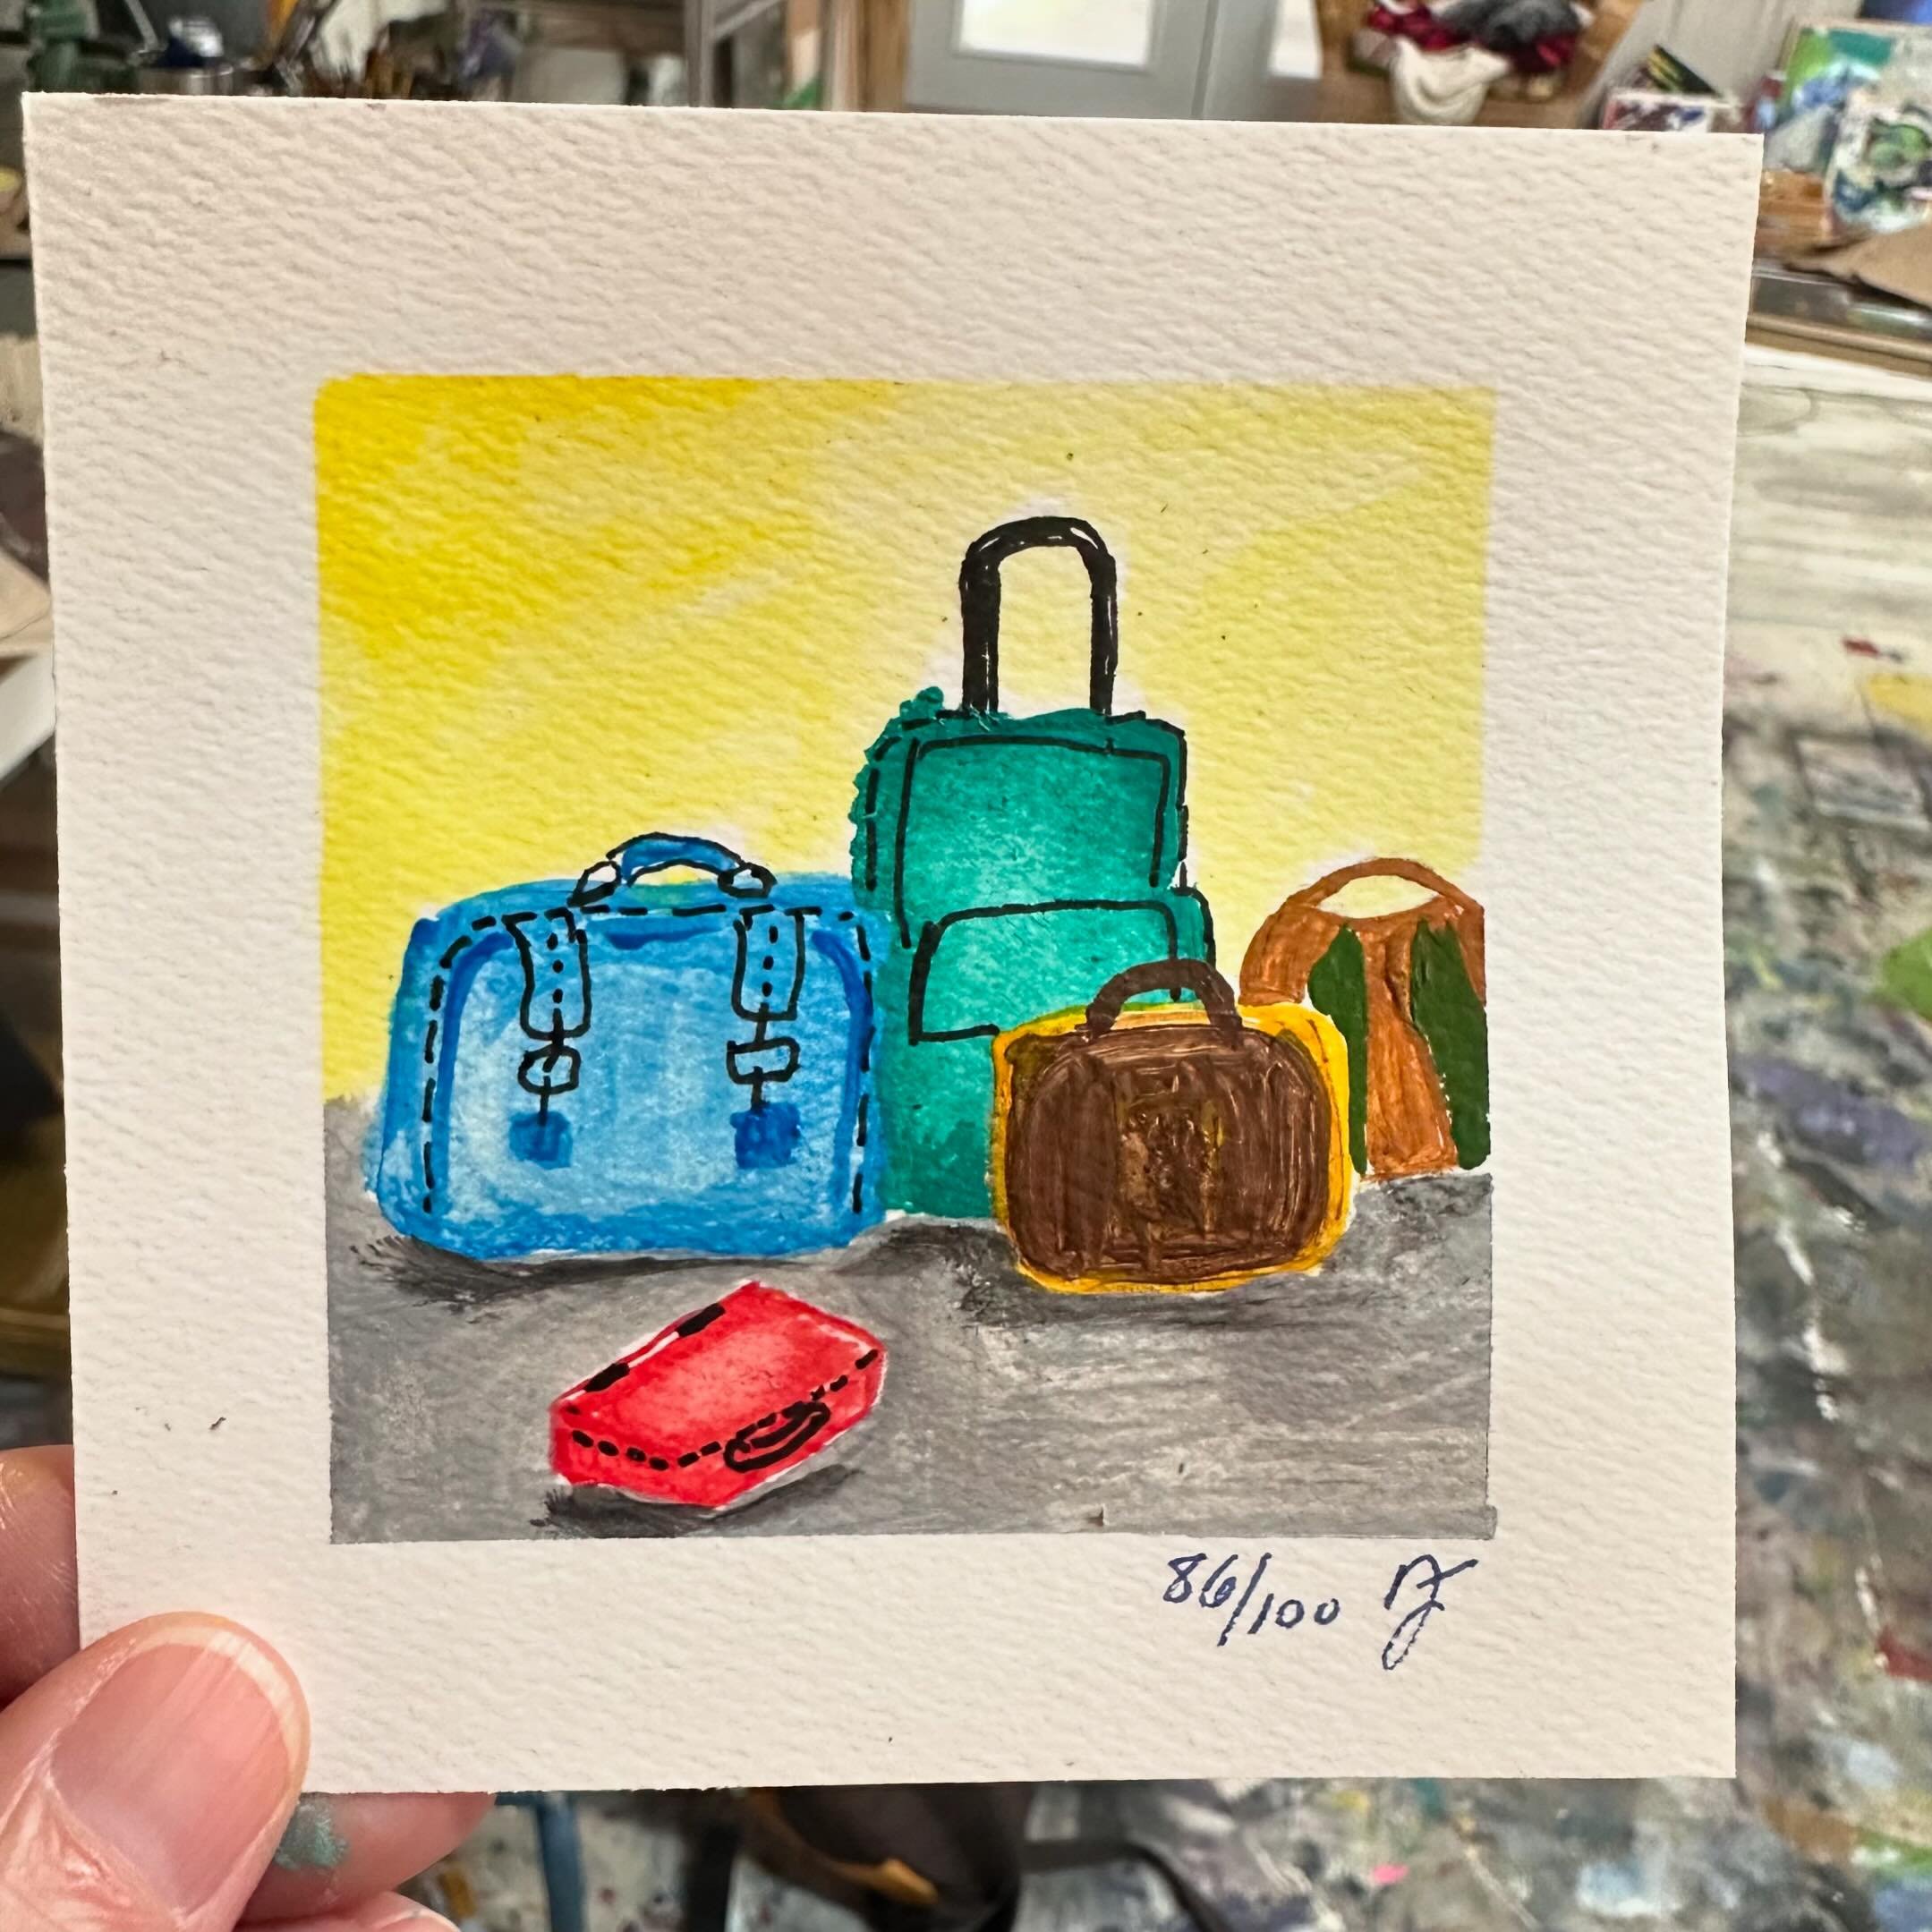 #the100dayproject Day 86 - have you ever thought about how much baggage you carry around with you each day&hellip;.
.
.
#nikkijorgensen #baggage #artistsoninstagram #artist #art #miniart #create #createeveryday